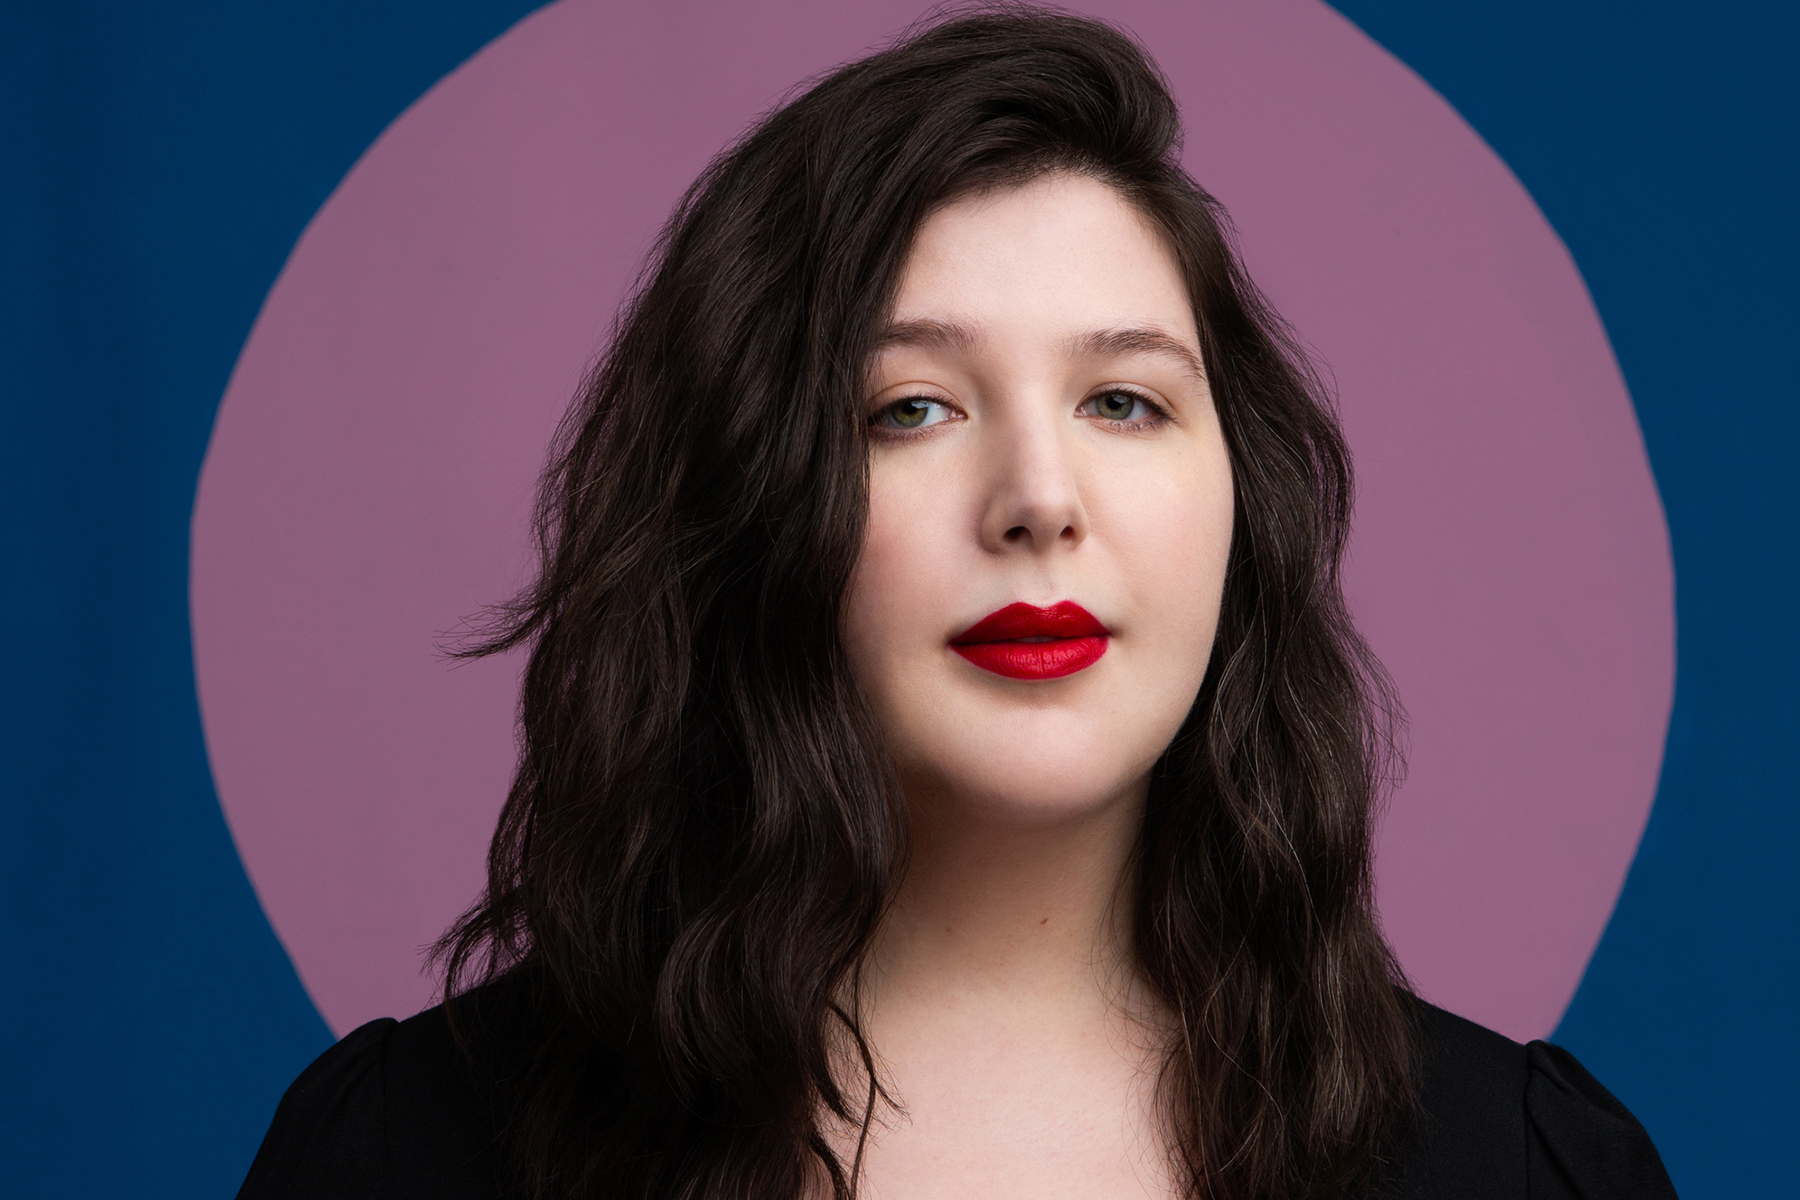 A photograph of Lucy Dacus against a pink and blue backdrop